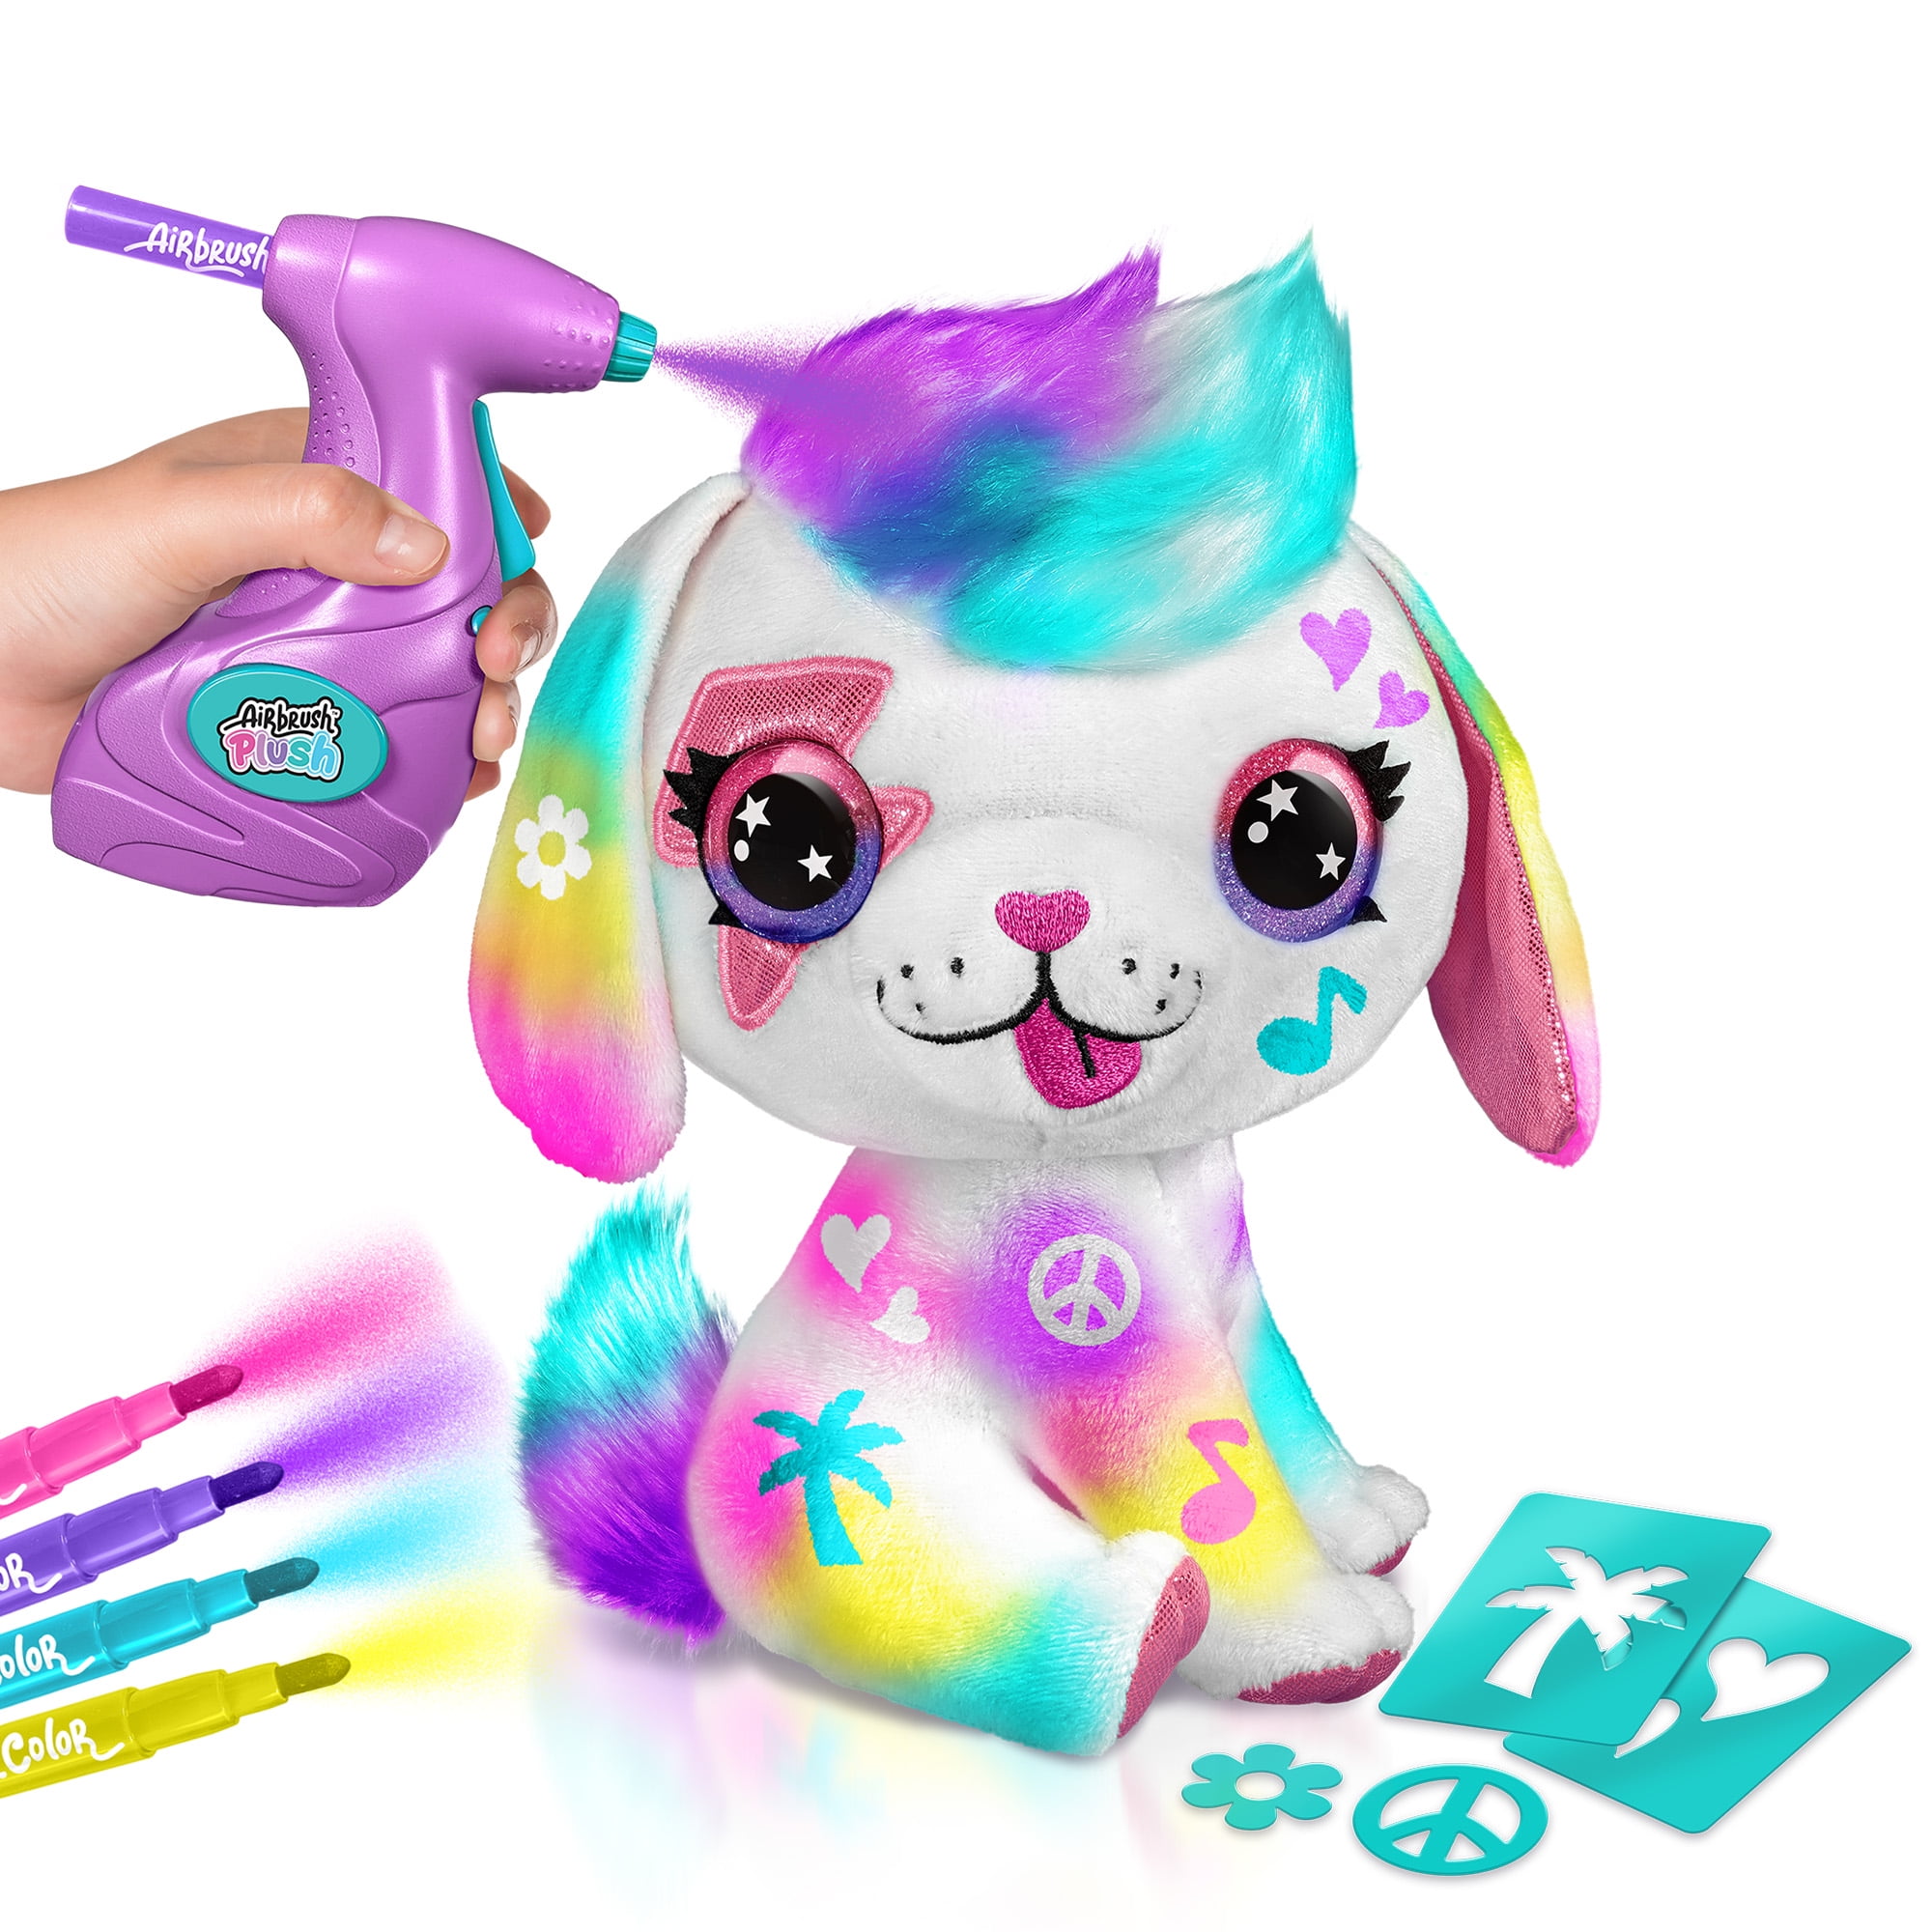  Canal Toys Personalize Airbrush Plush Large Puppy! Decorate,  wash, Repeat! Customize Your own Spray Art Plush with Markers, Battery  Powered Airbrush and 100+ Stencils. Ages 6+ : Everything Else